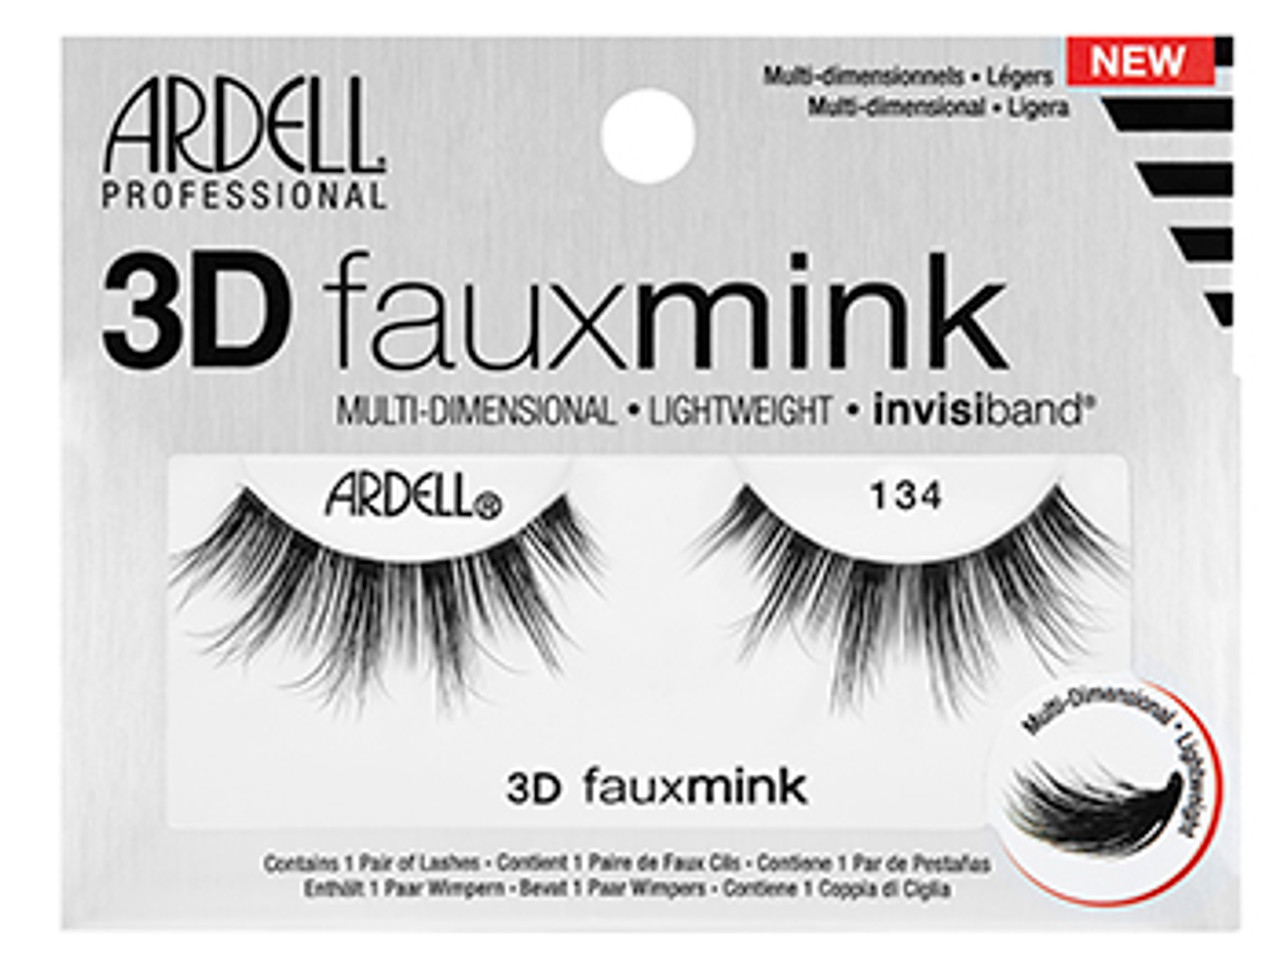 Ardell 3D fauxmink Invisiband - 134